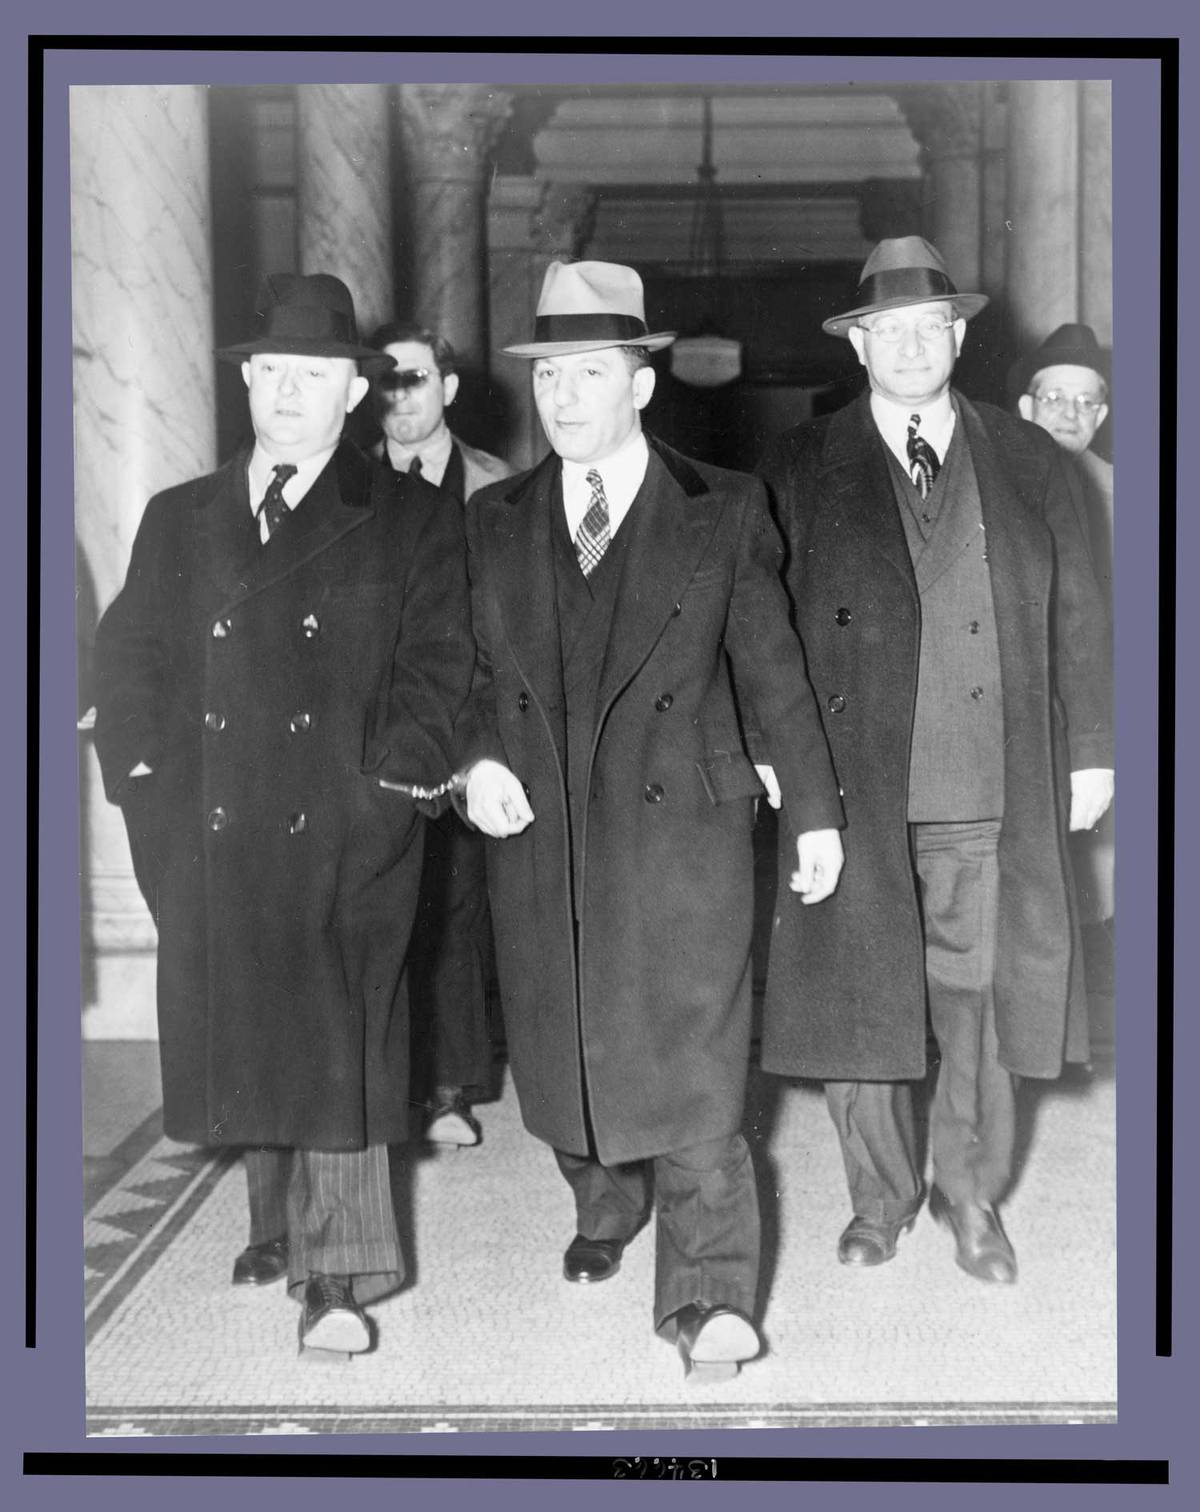 Louis ‘Lepke’ Buchalter, center, handcuffed to J. Edgar Hoover, on the left, with another man on the right, at the courthouse entrance, 1939 or 1940